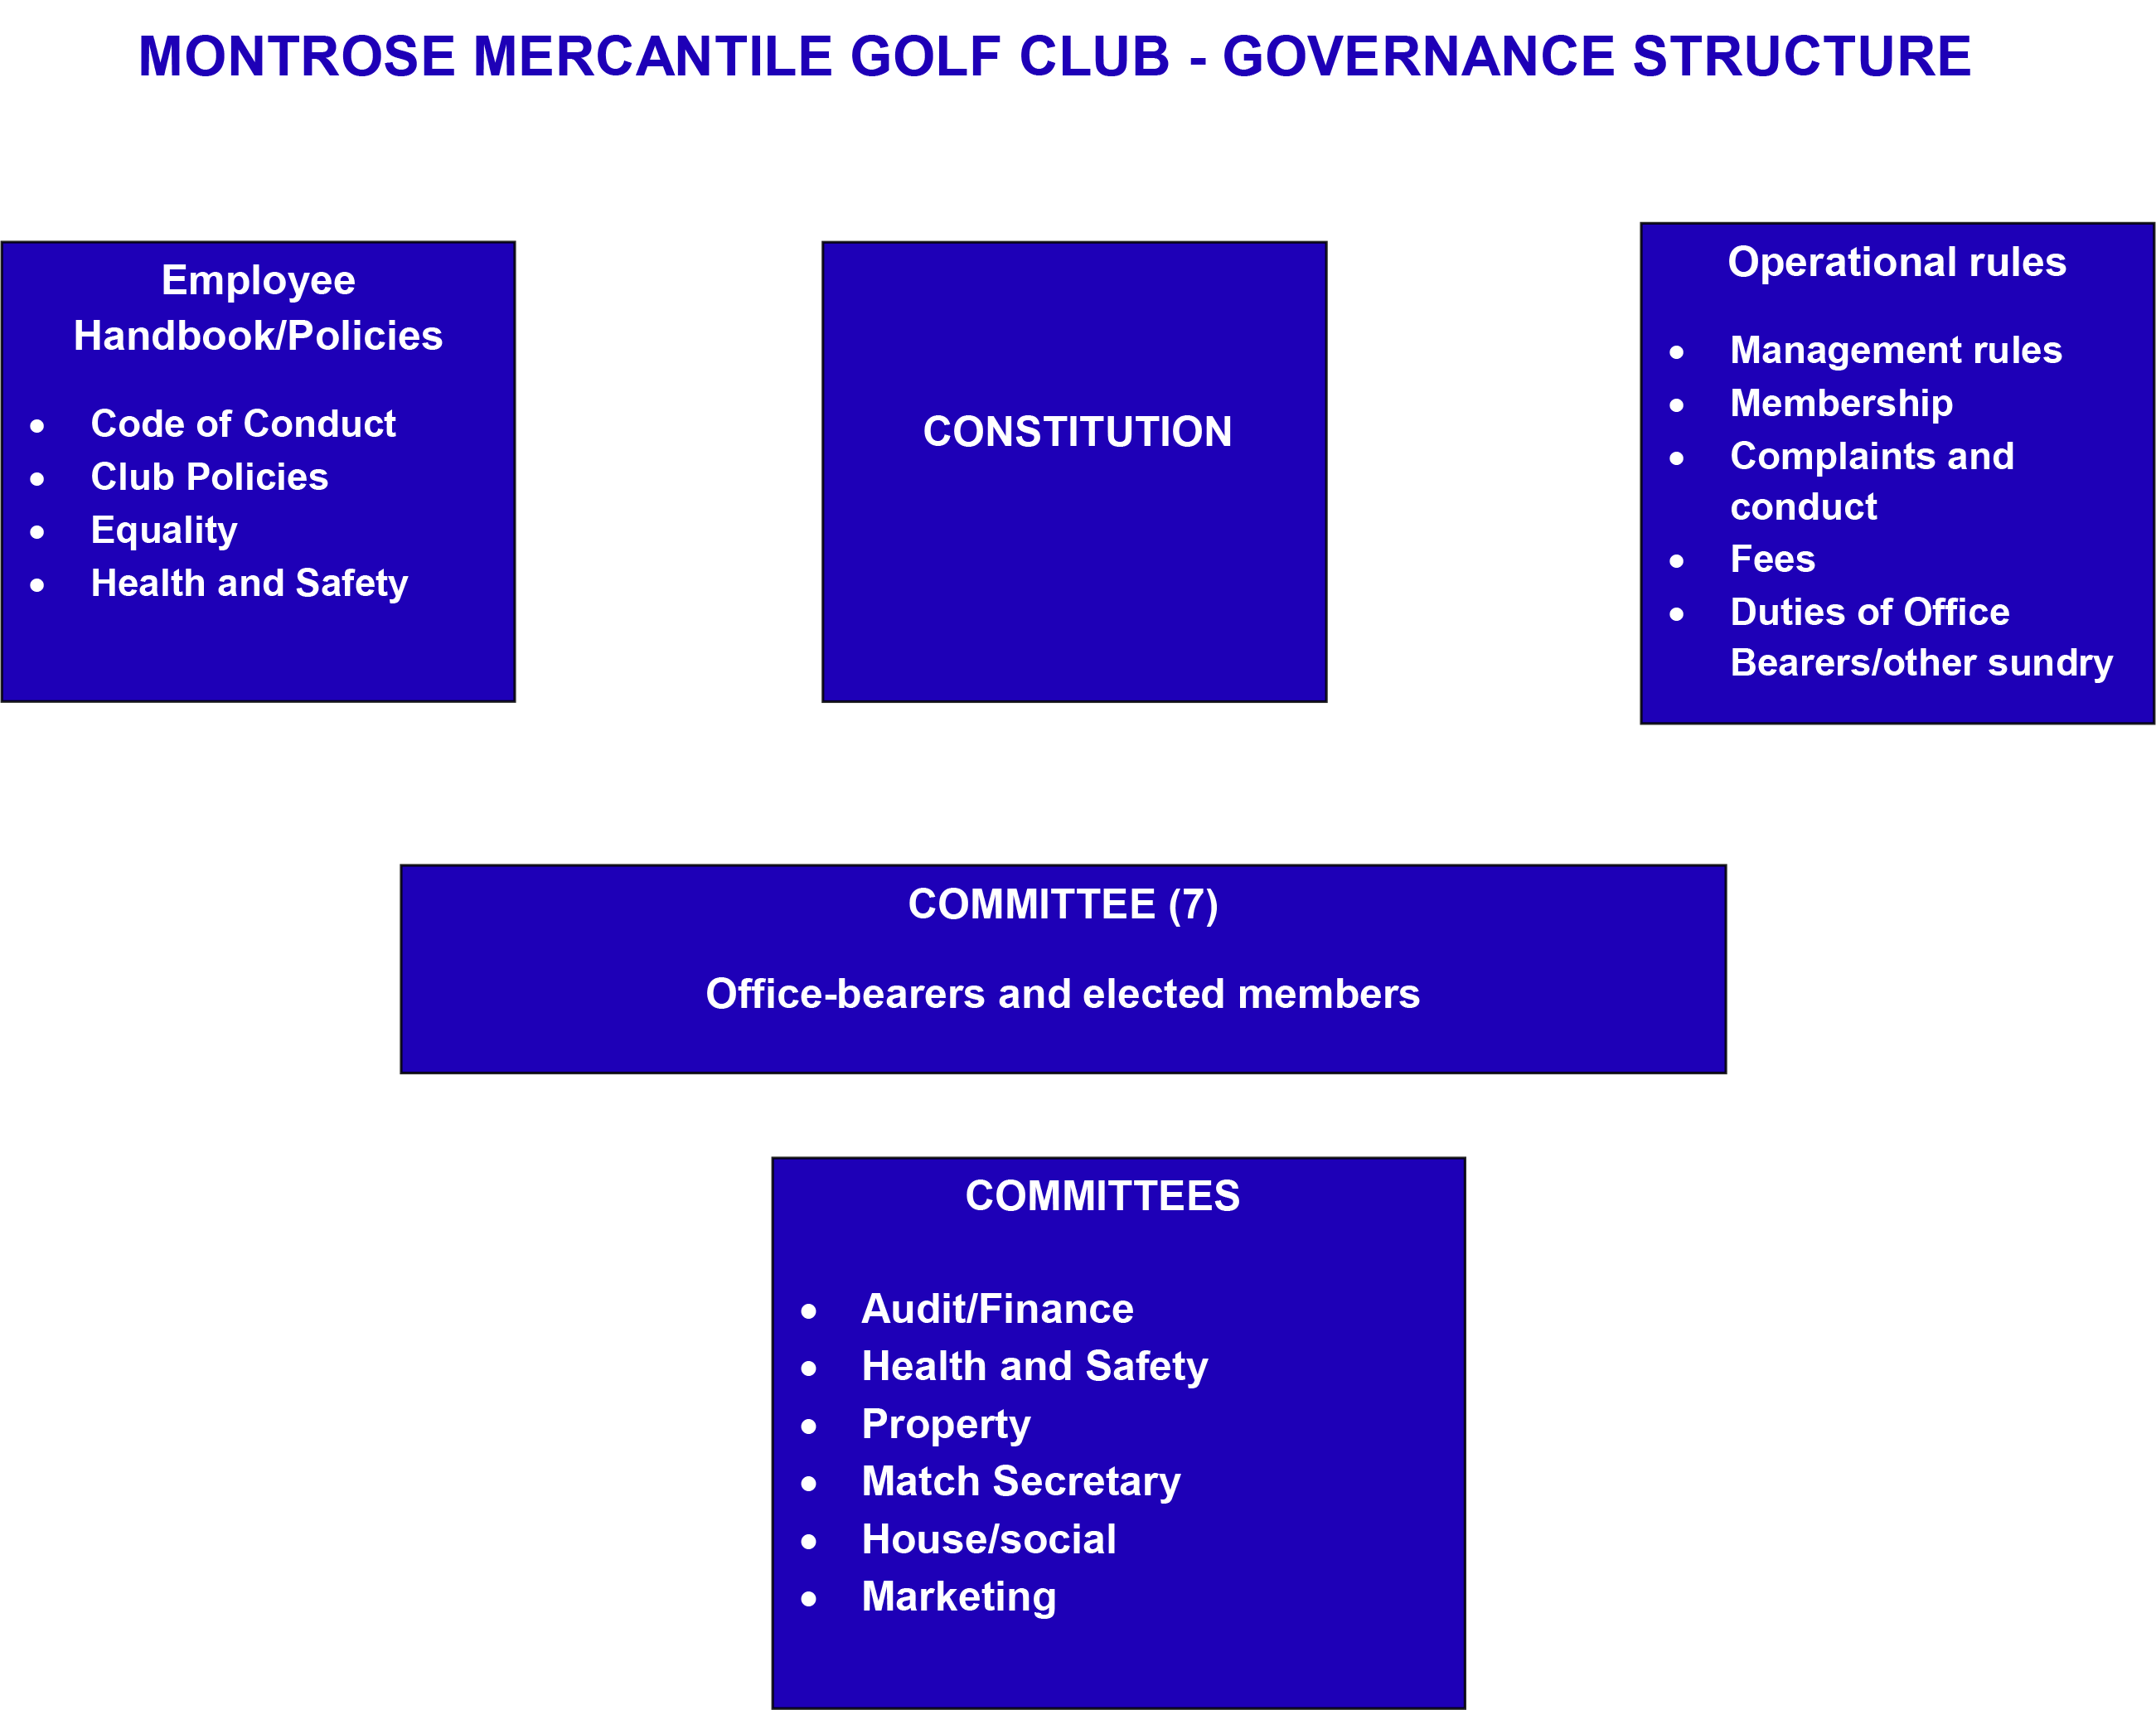 Recommended governance 2017